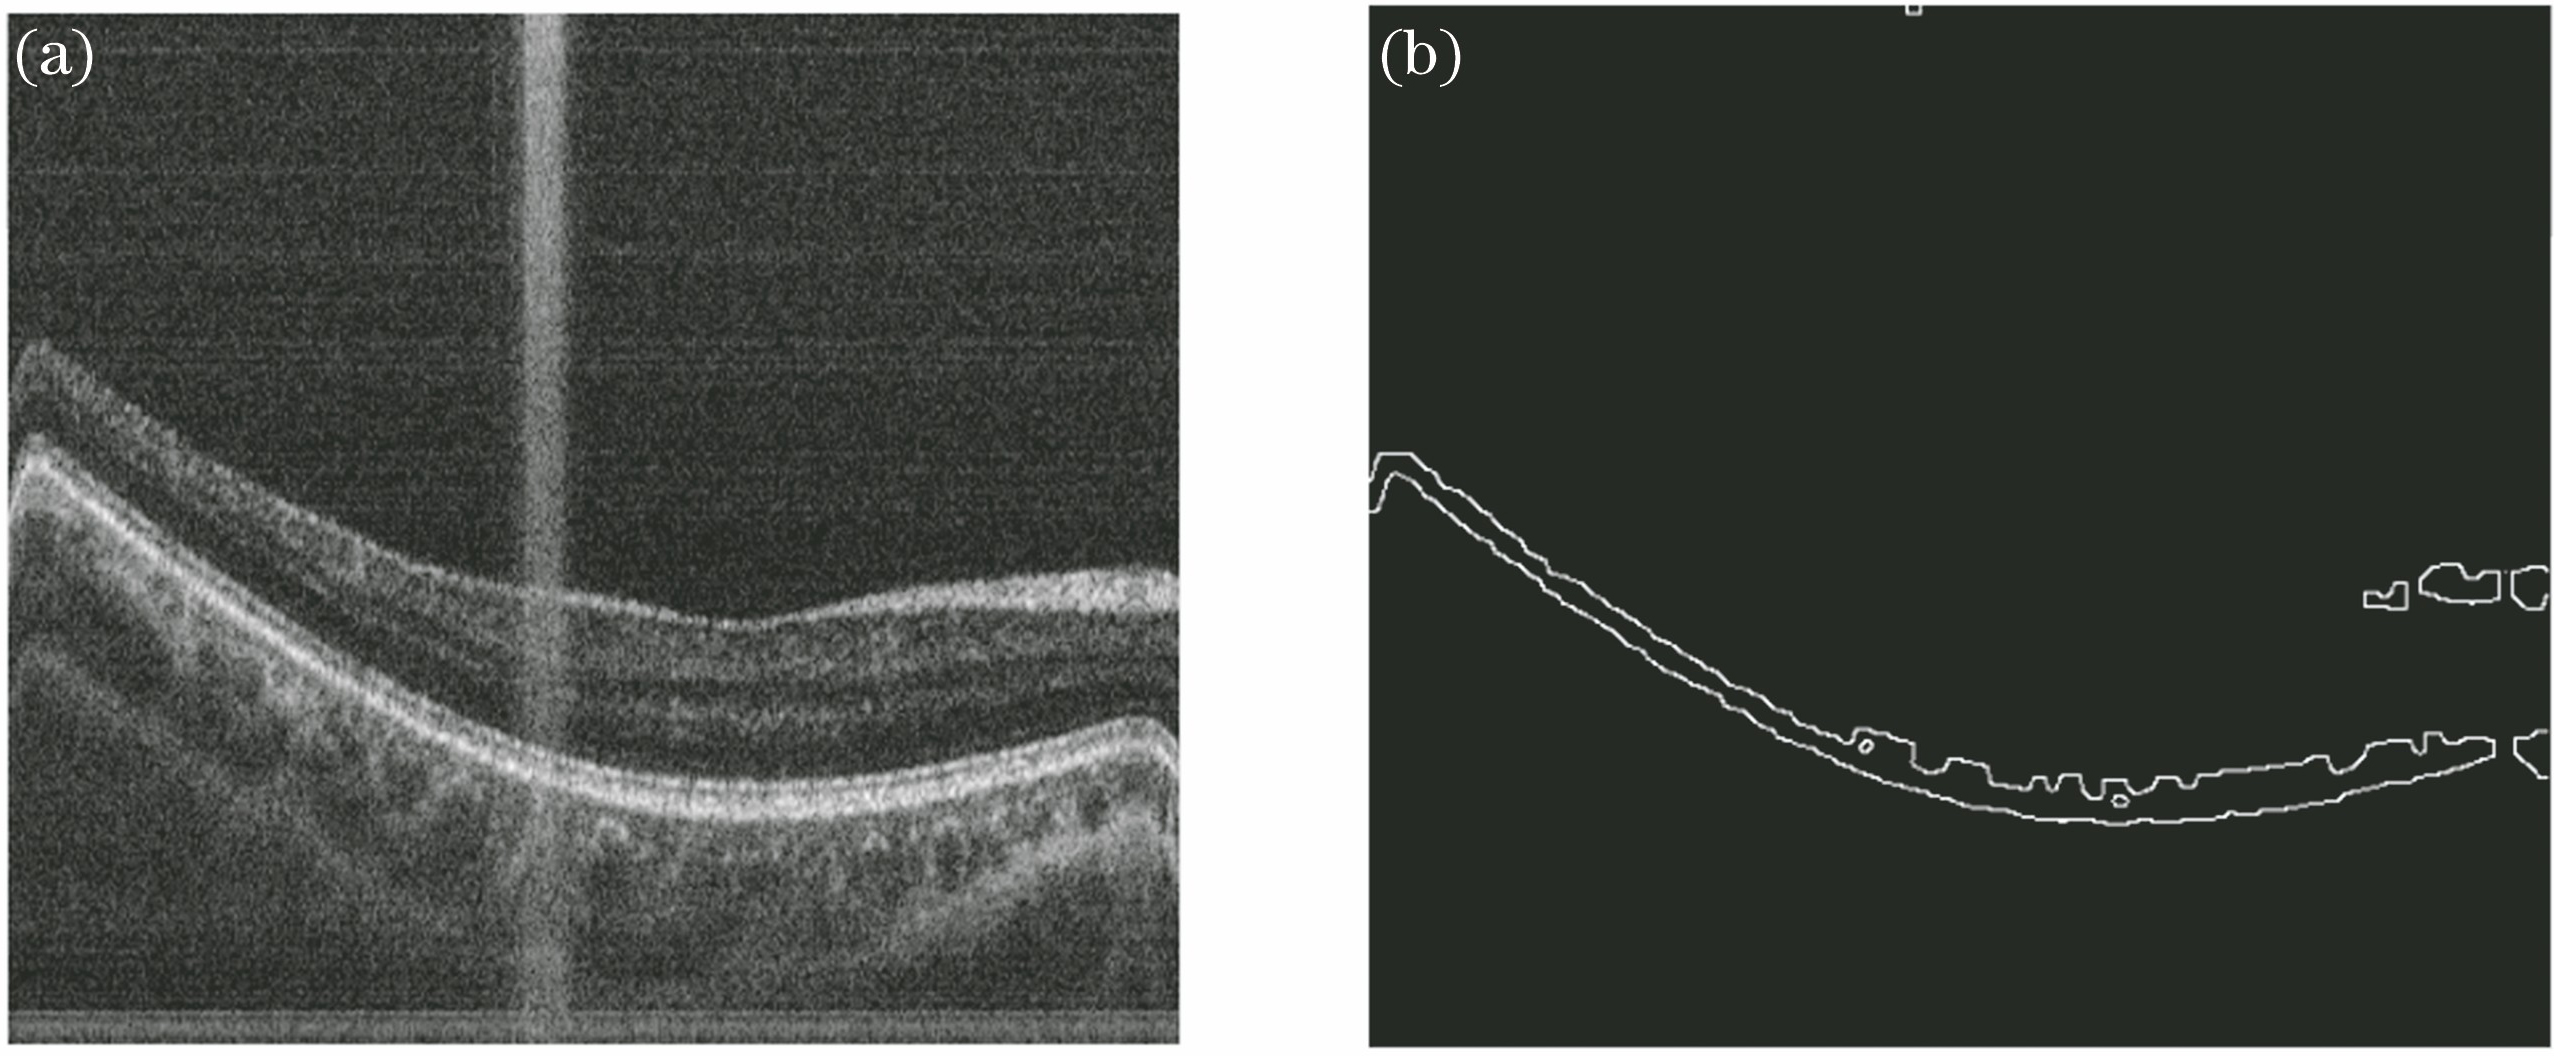 Extracting boundary of OCT image. (a) Original OCT retinal image; (b) boundary extracting image